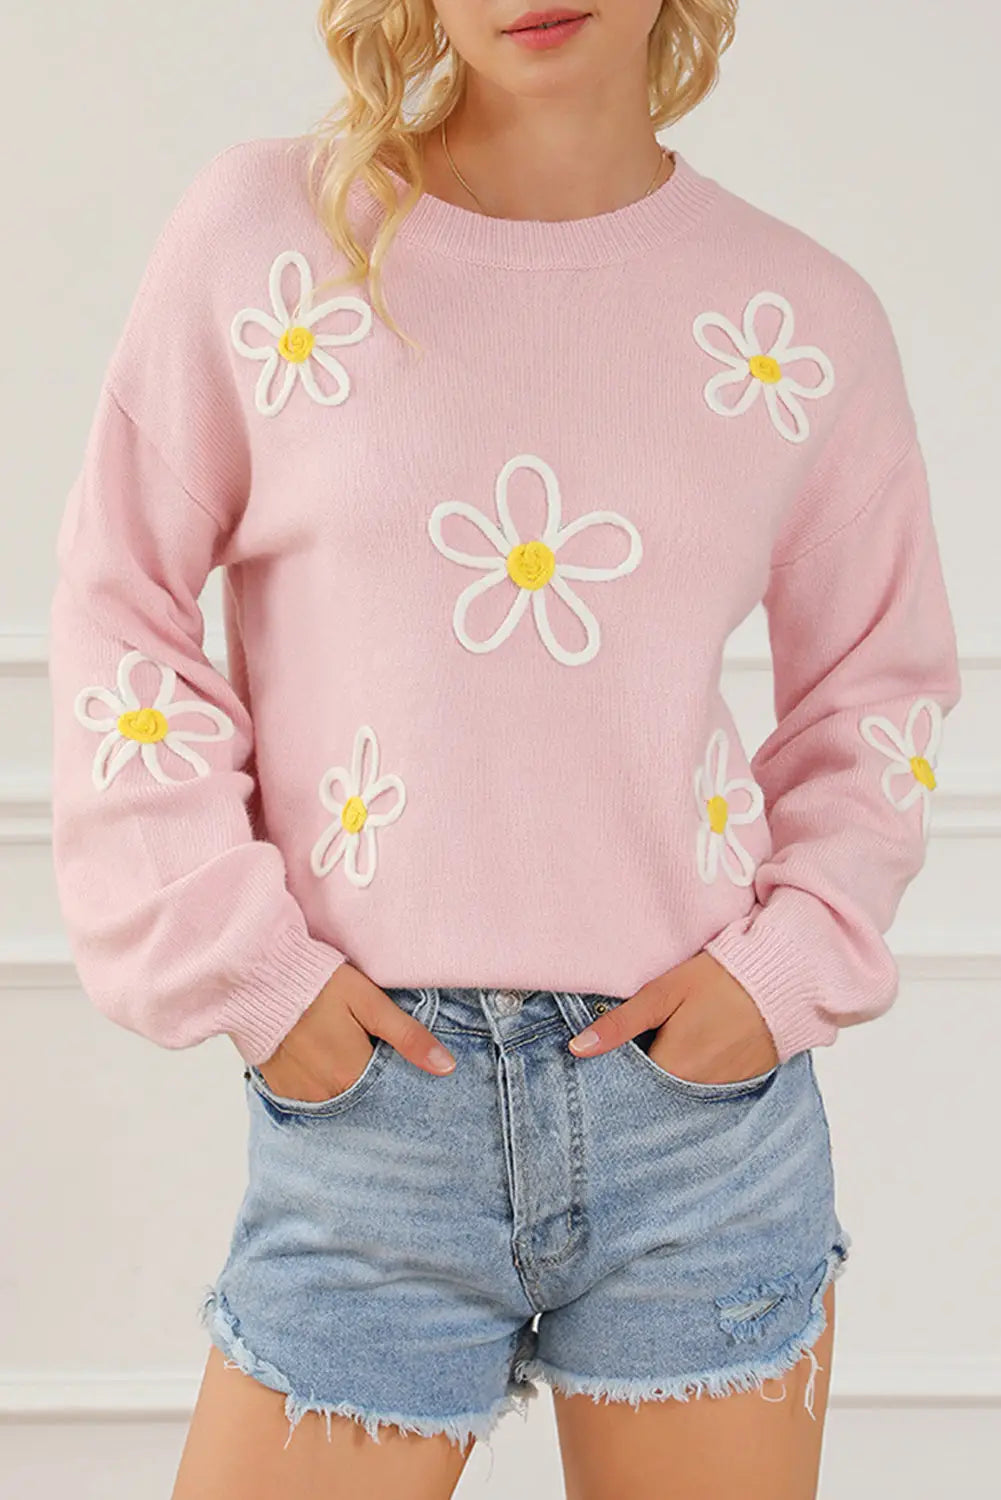 Pink chenille daisy stitching crew neck sweater - l / 50% viscose + 28% polyester + 22% polyamide - sweaters & cardigans